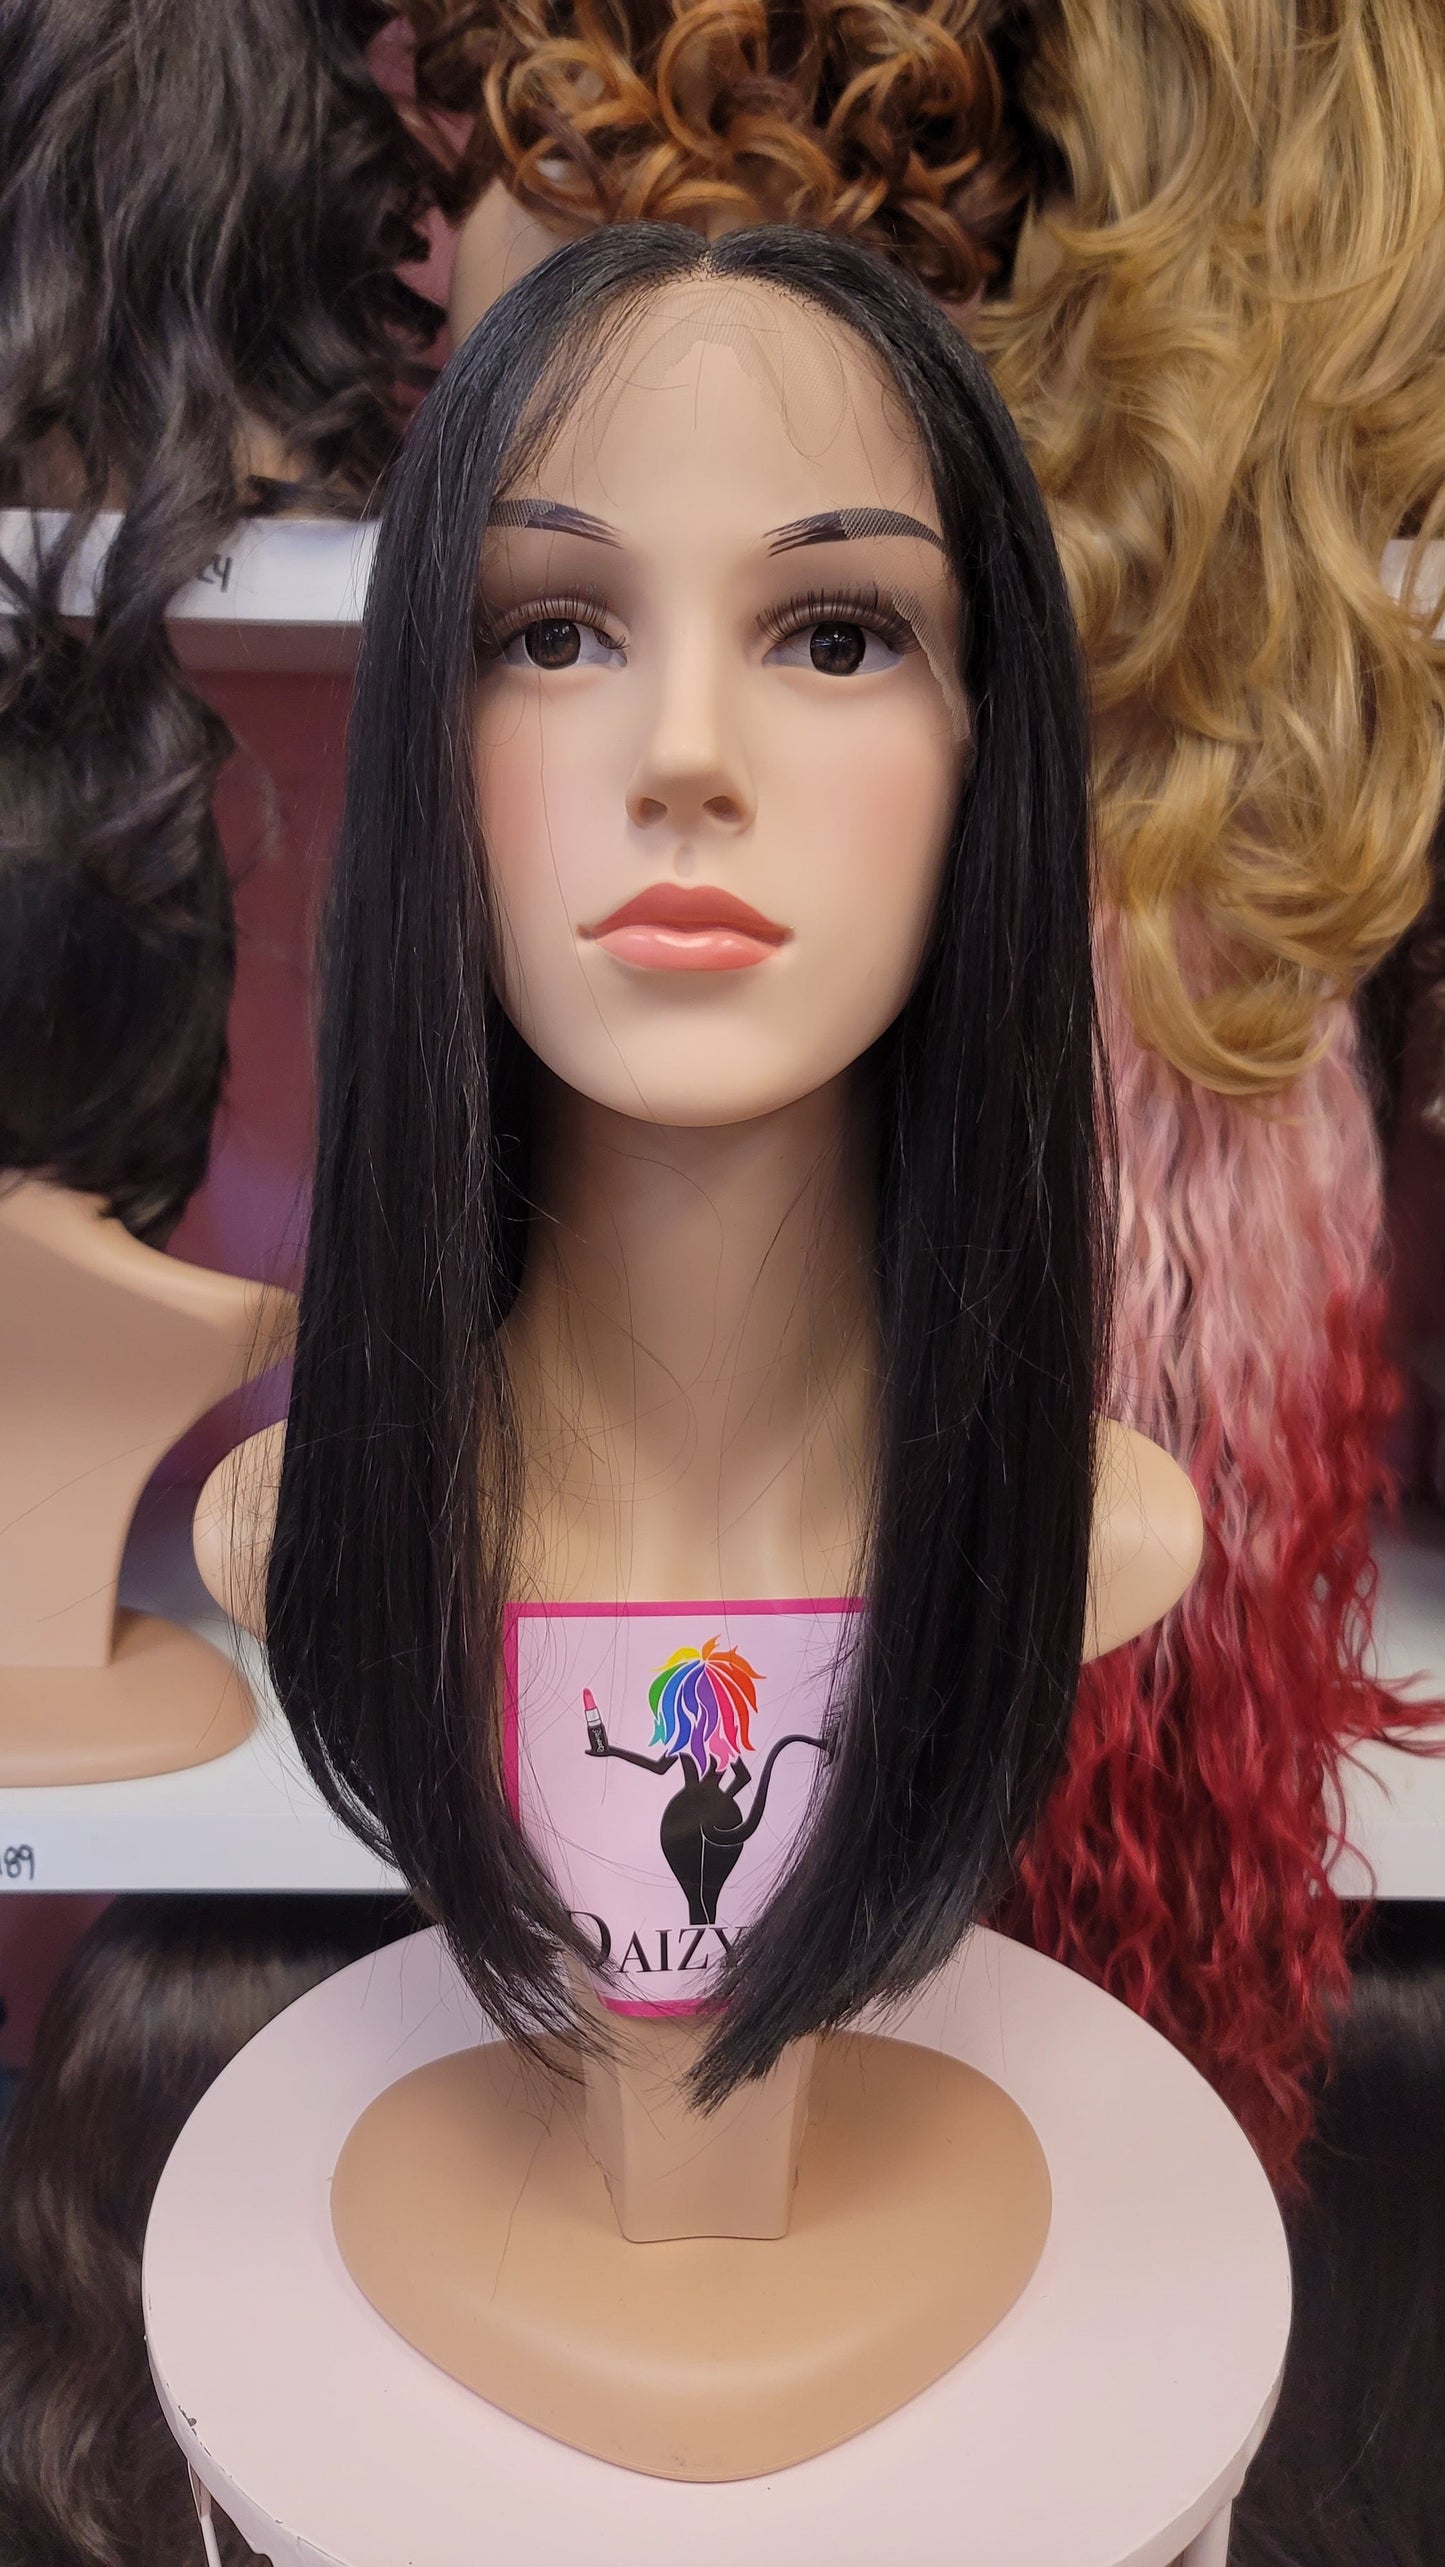 234 JACKIE - Middle Part Lace Front Wig - 2 - DaizyKat Cosmetics 234 JACKIE - Middle Part Lace Front Wig - 2 DaizyKat Cosmetics Wigs